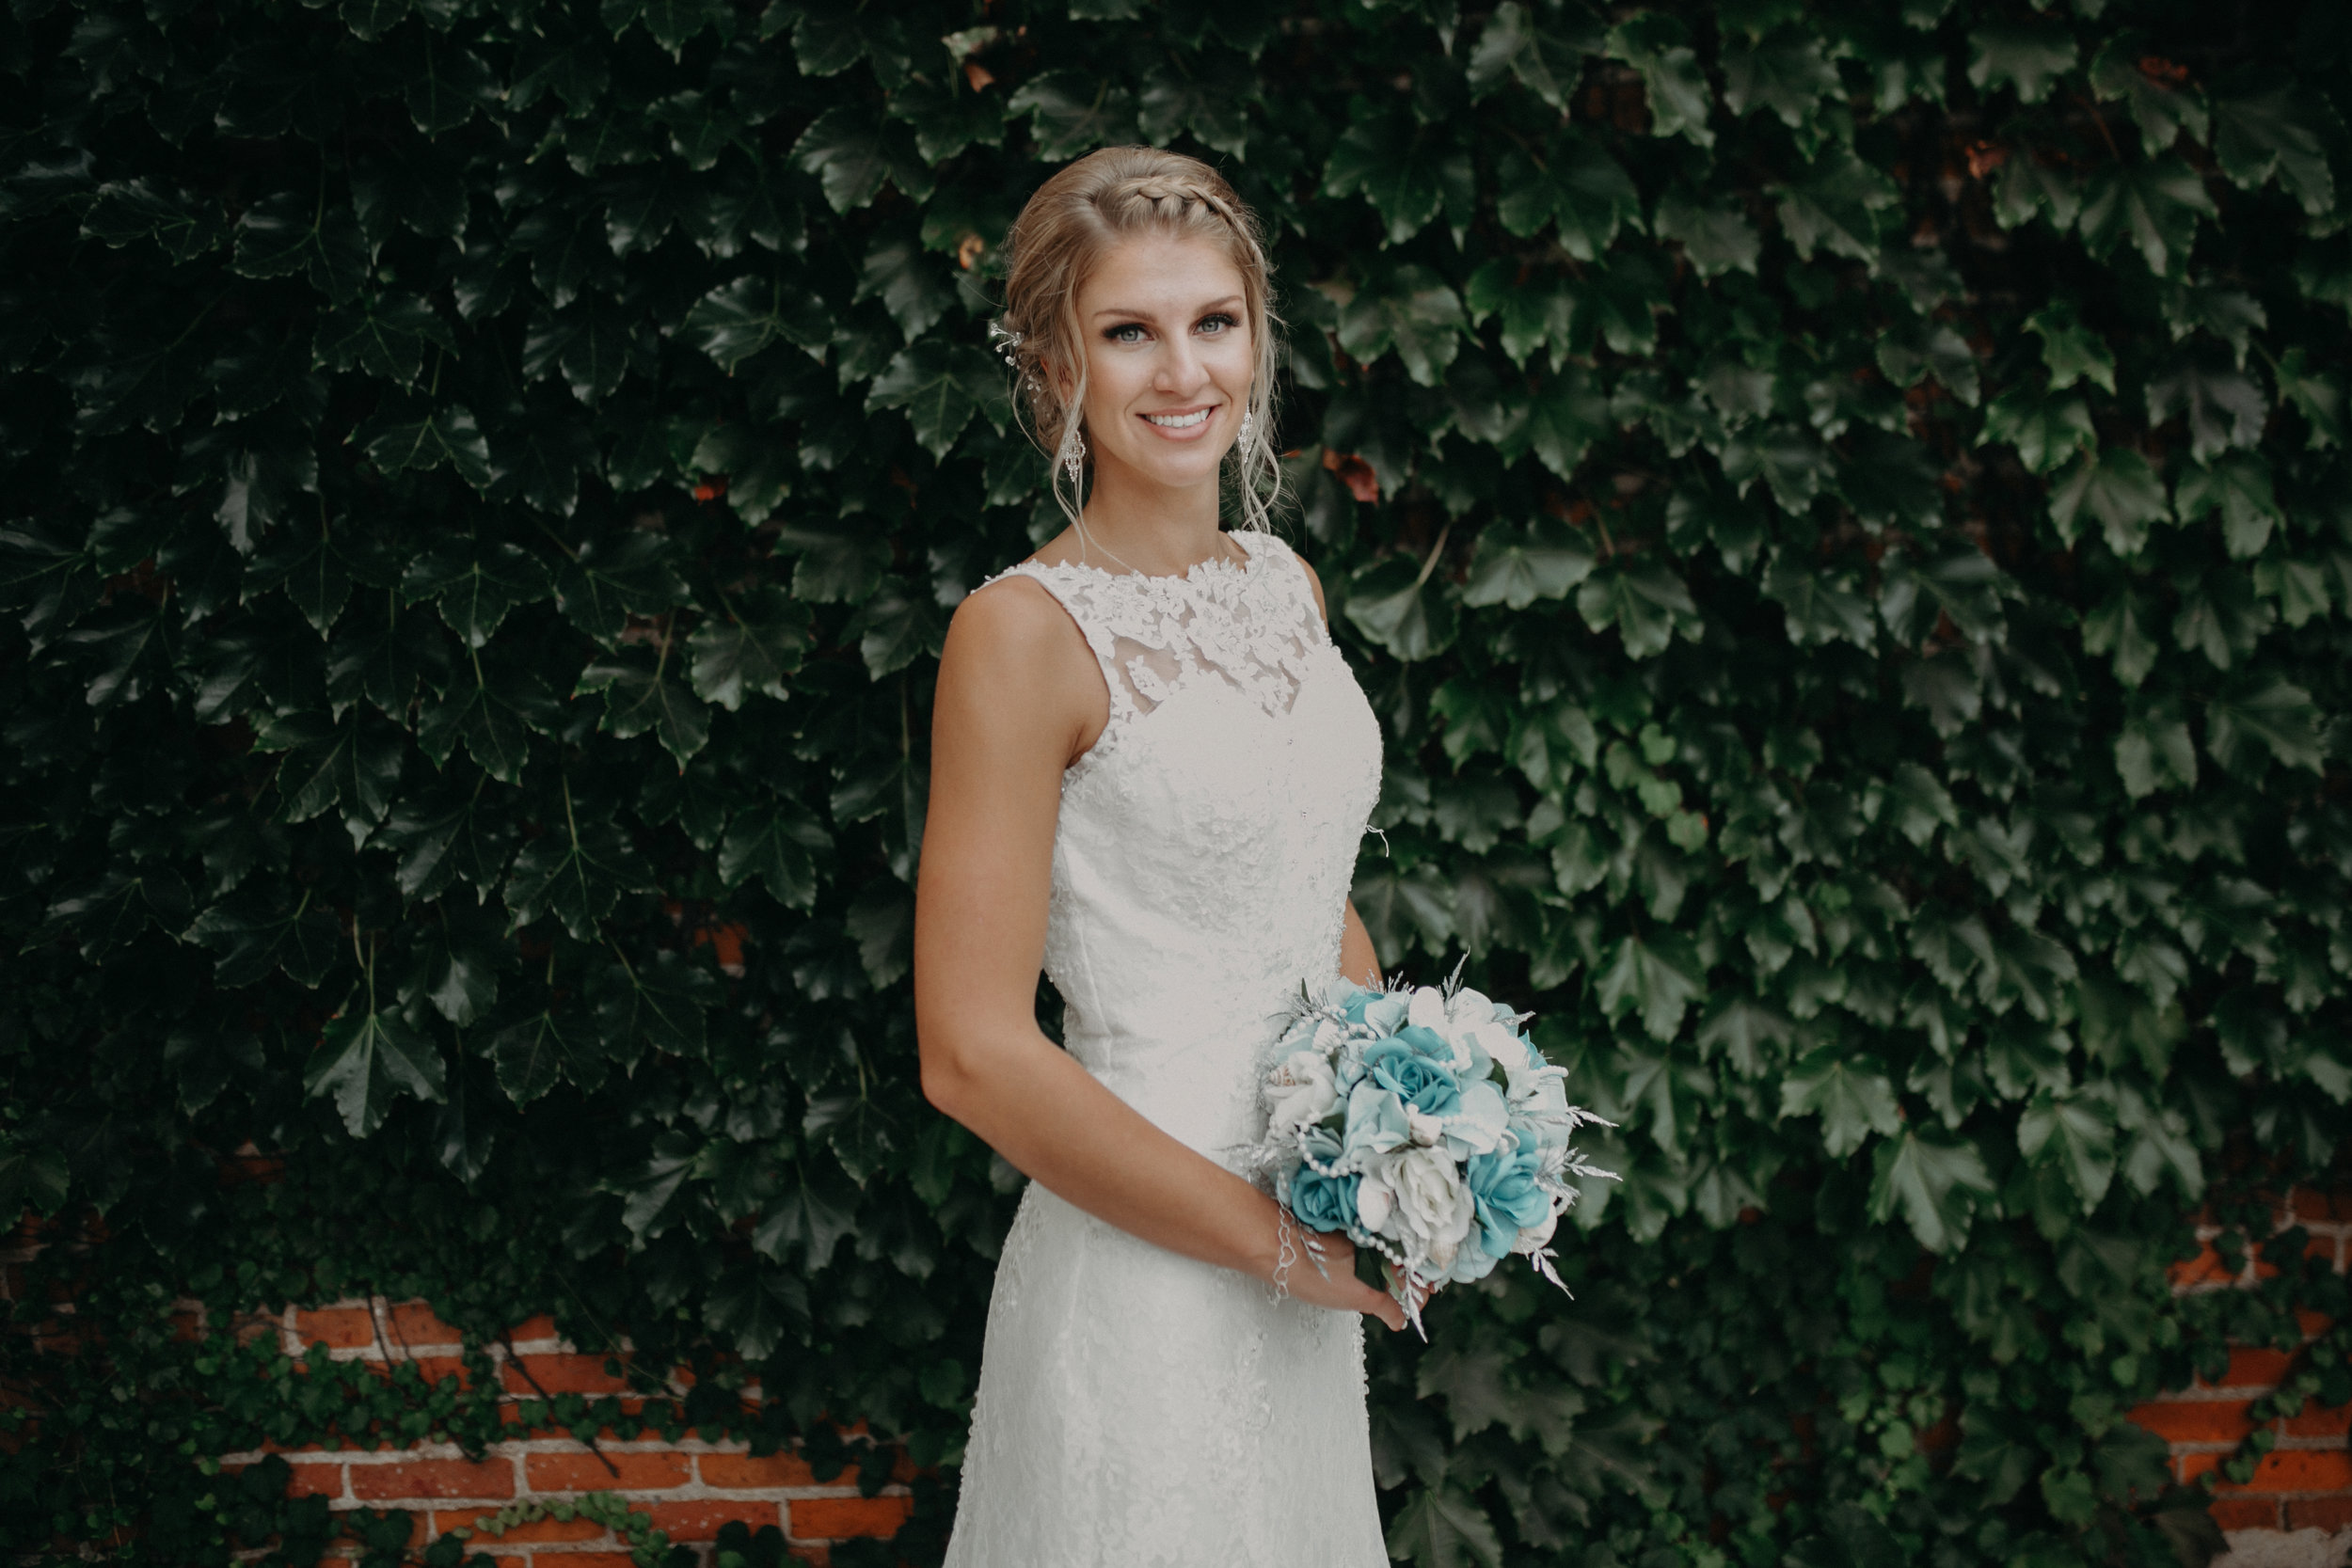  Andrea Wagner Photography with Tiffany Lenz at her wedding in Marshfield WI by Thomas House 